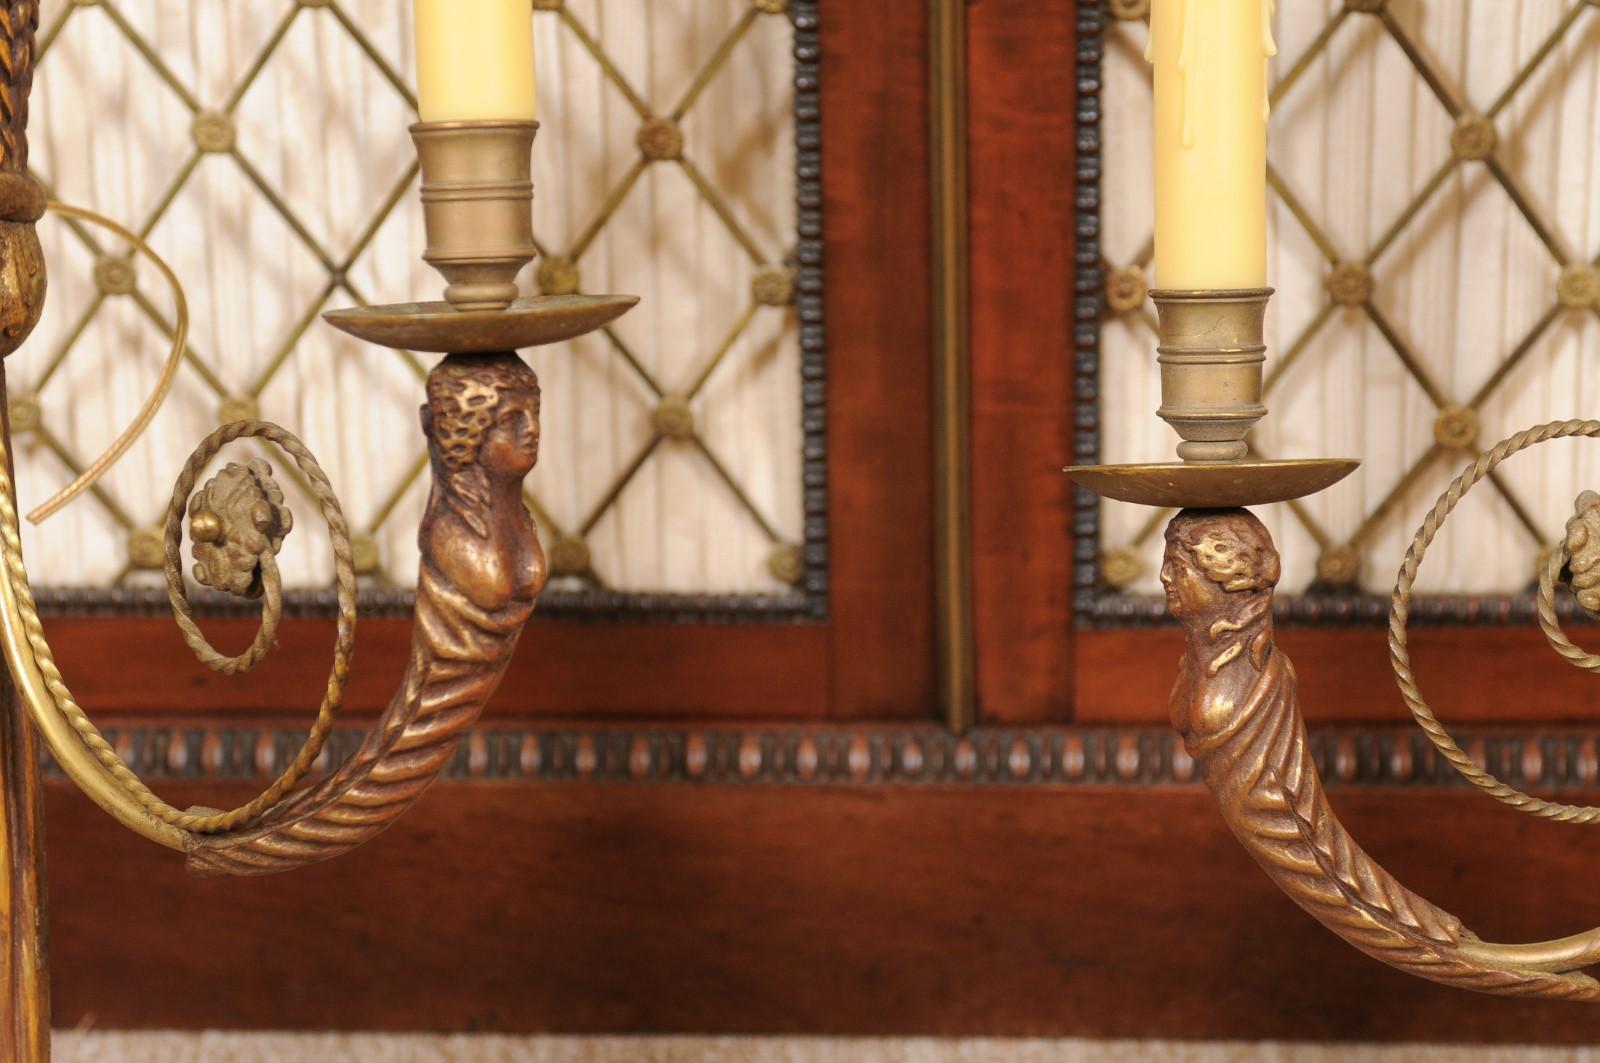  Pair of Giltwood Carved Eagle 2 Light Sconces with Tassle Detail, 20th Century For Sale 9